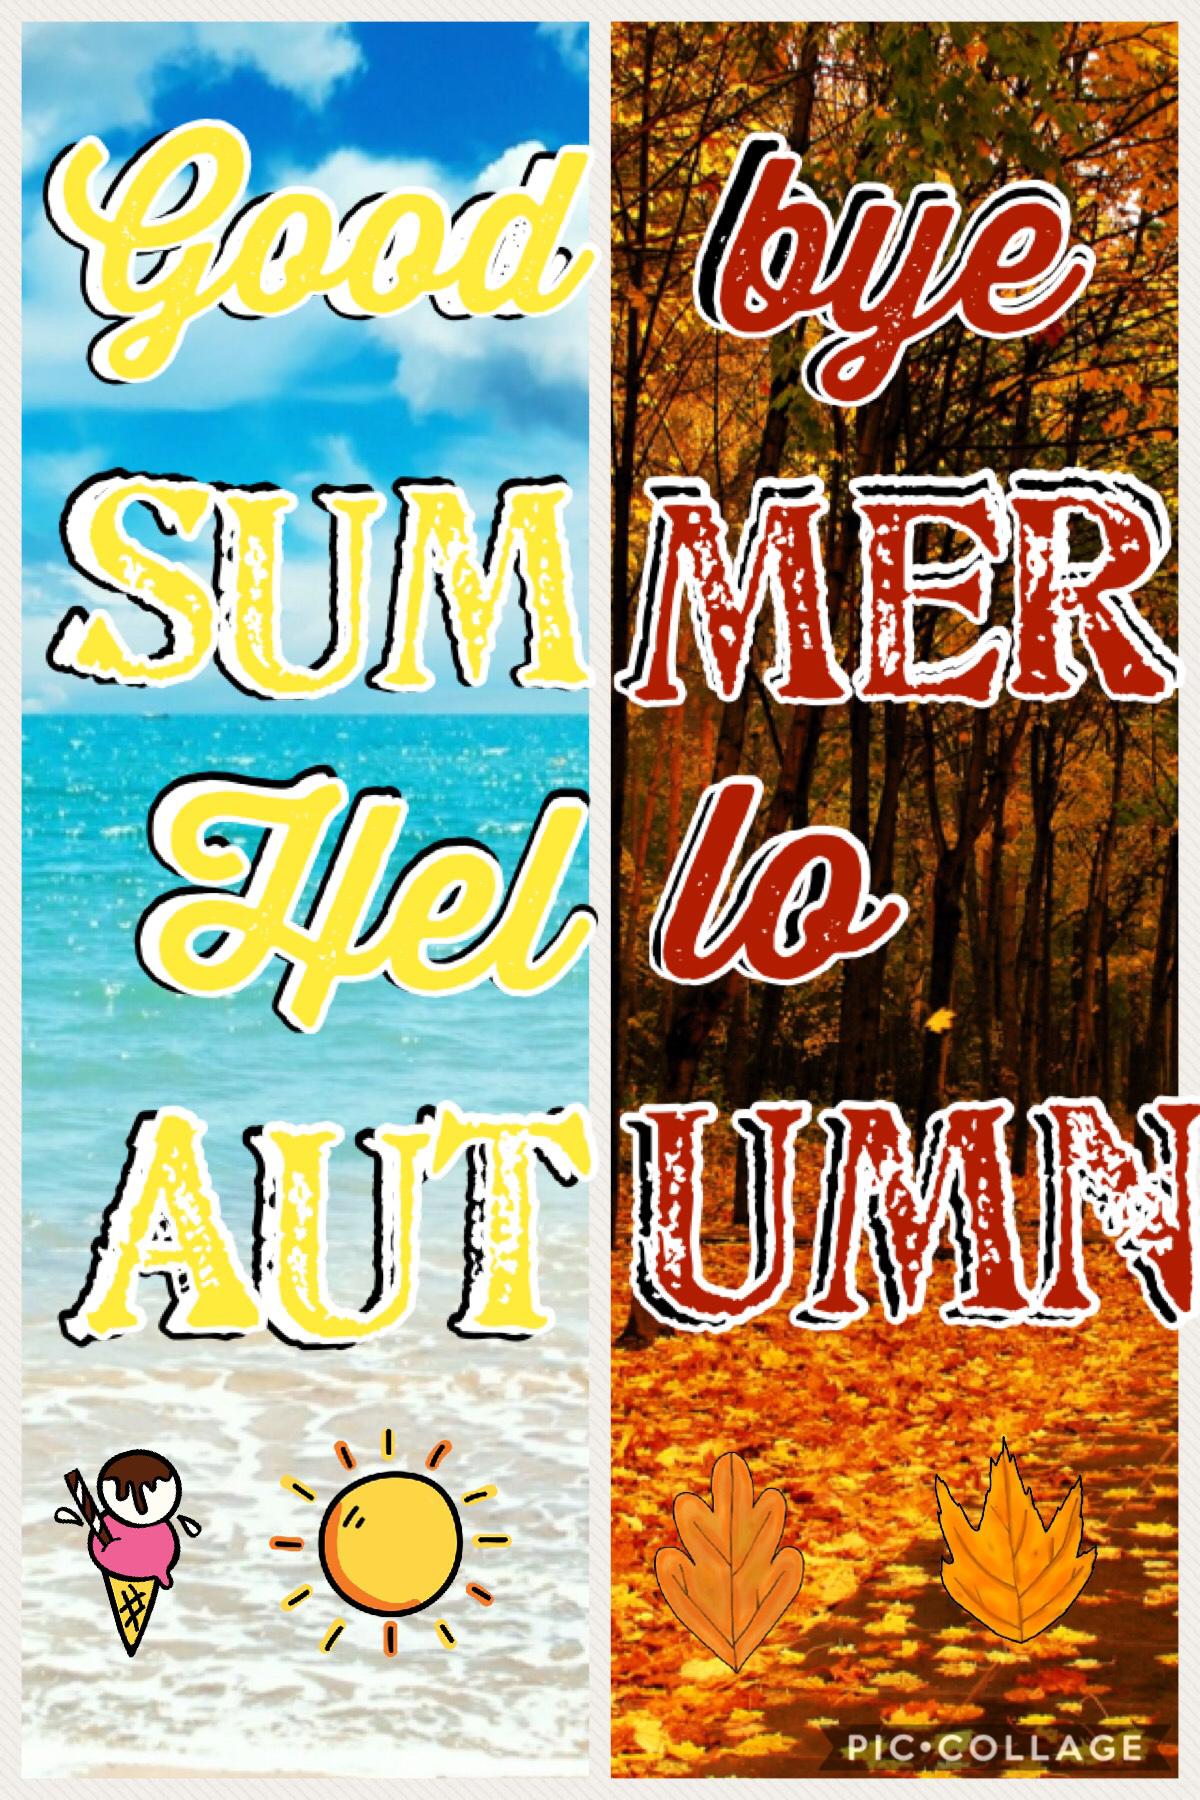 I am sad to see summer go so soon, but I am happy for all the festivities in fall! What is your favourite fall event?